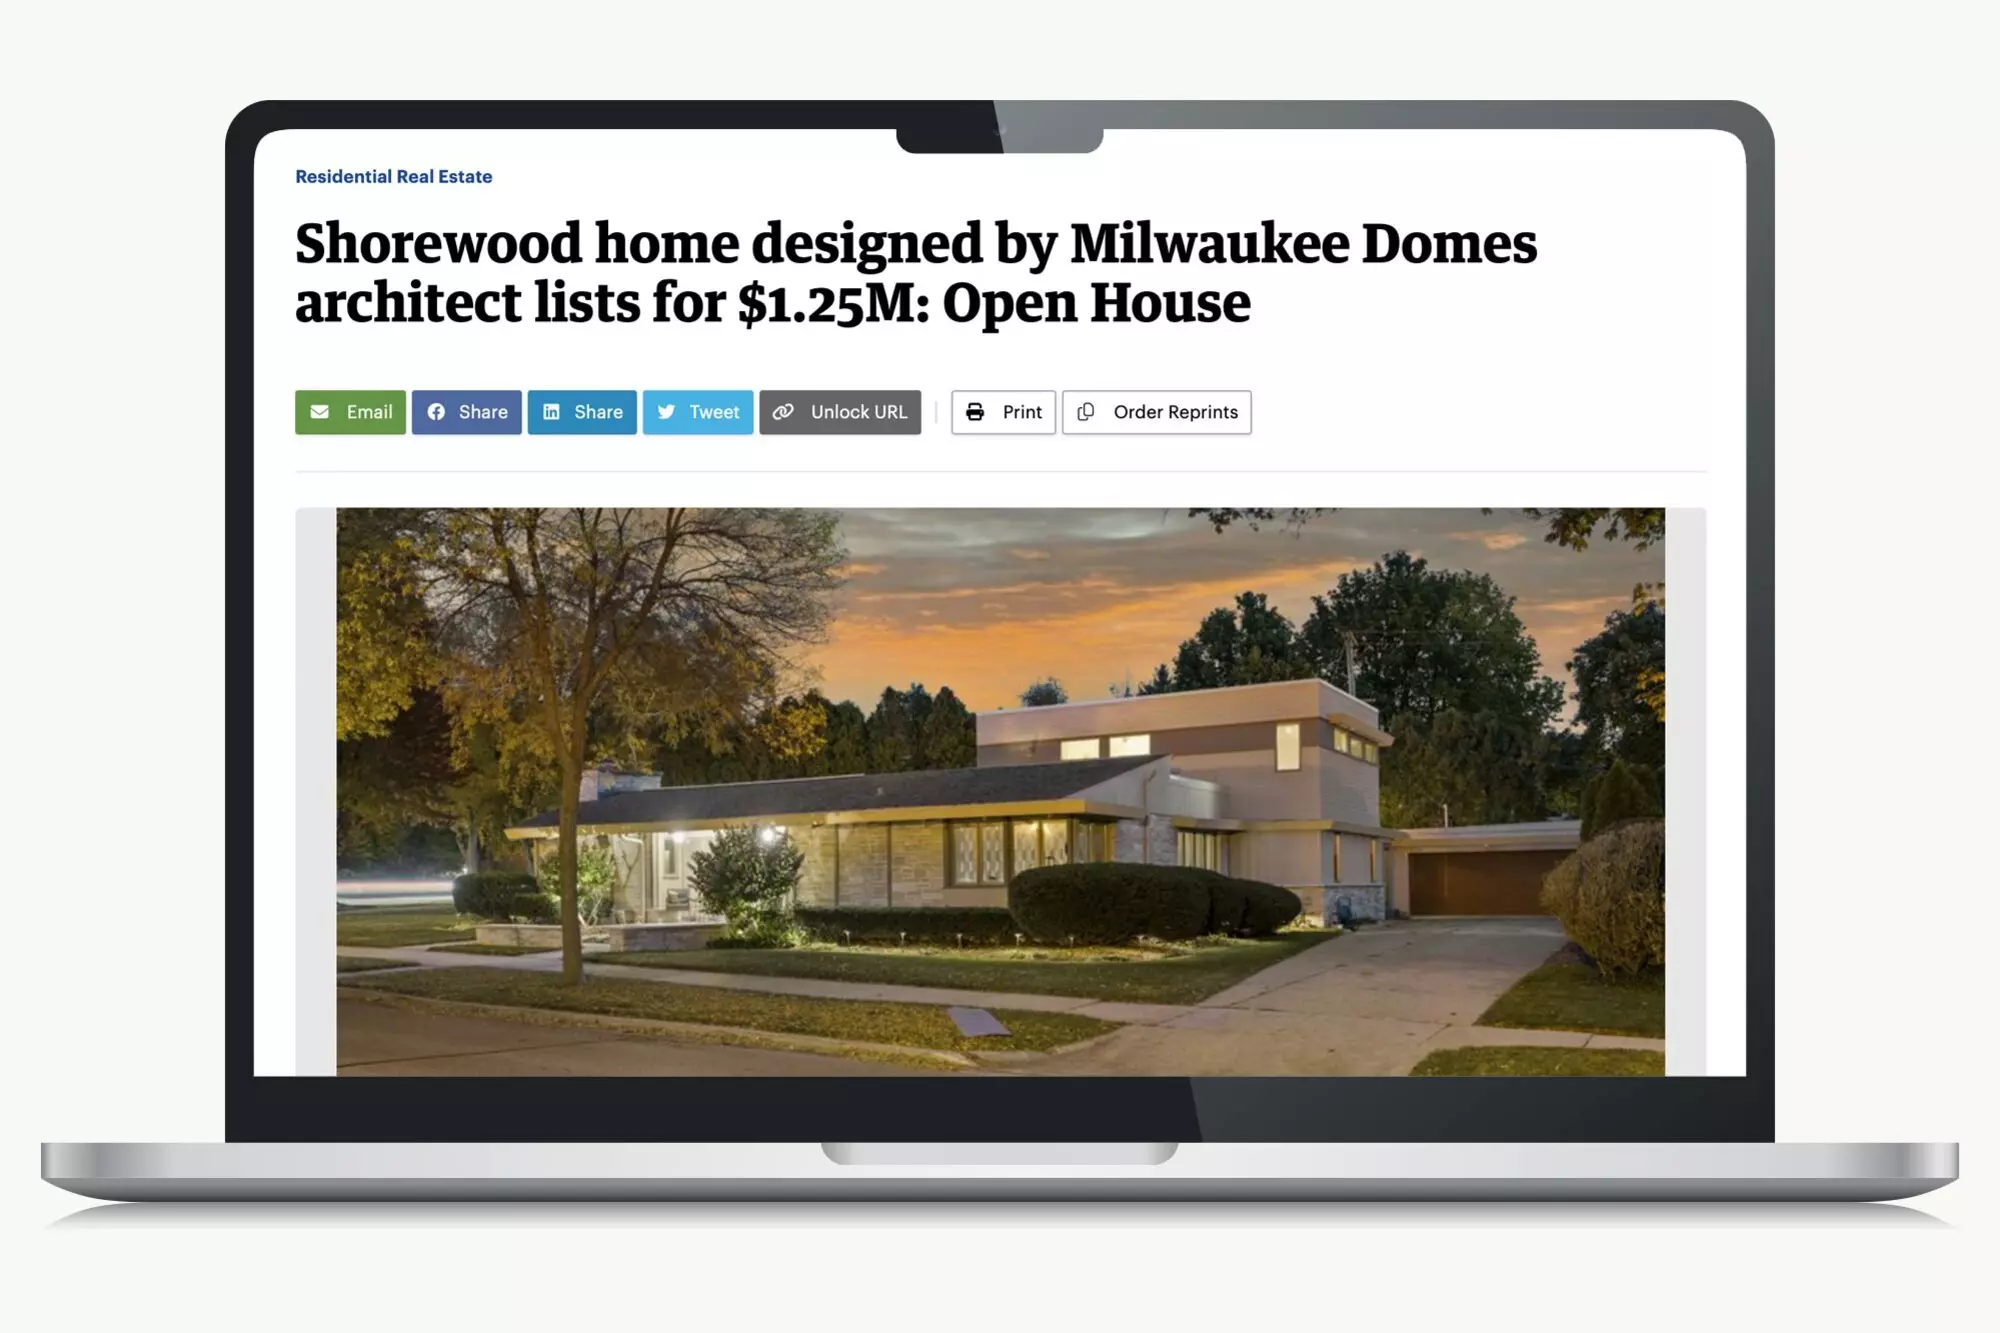 Milwaukee Business Journal - Shorewood home designed by Milwaukee Domes architect lists for $1.25M: Open House